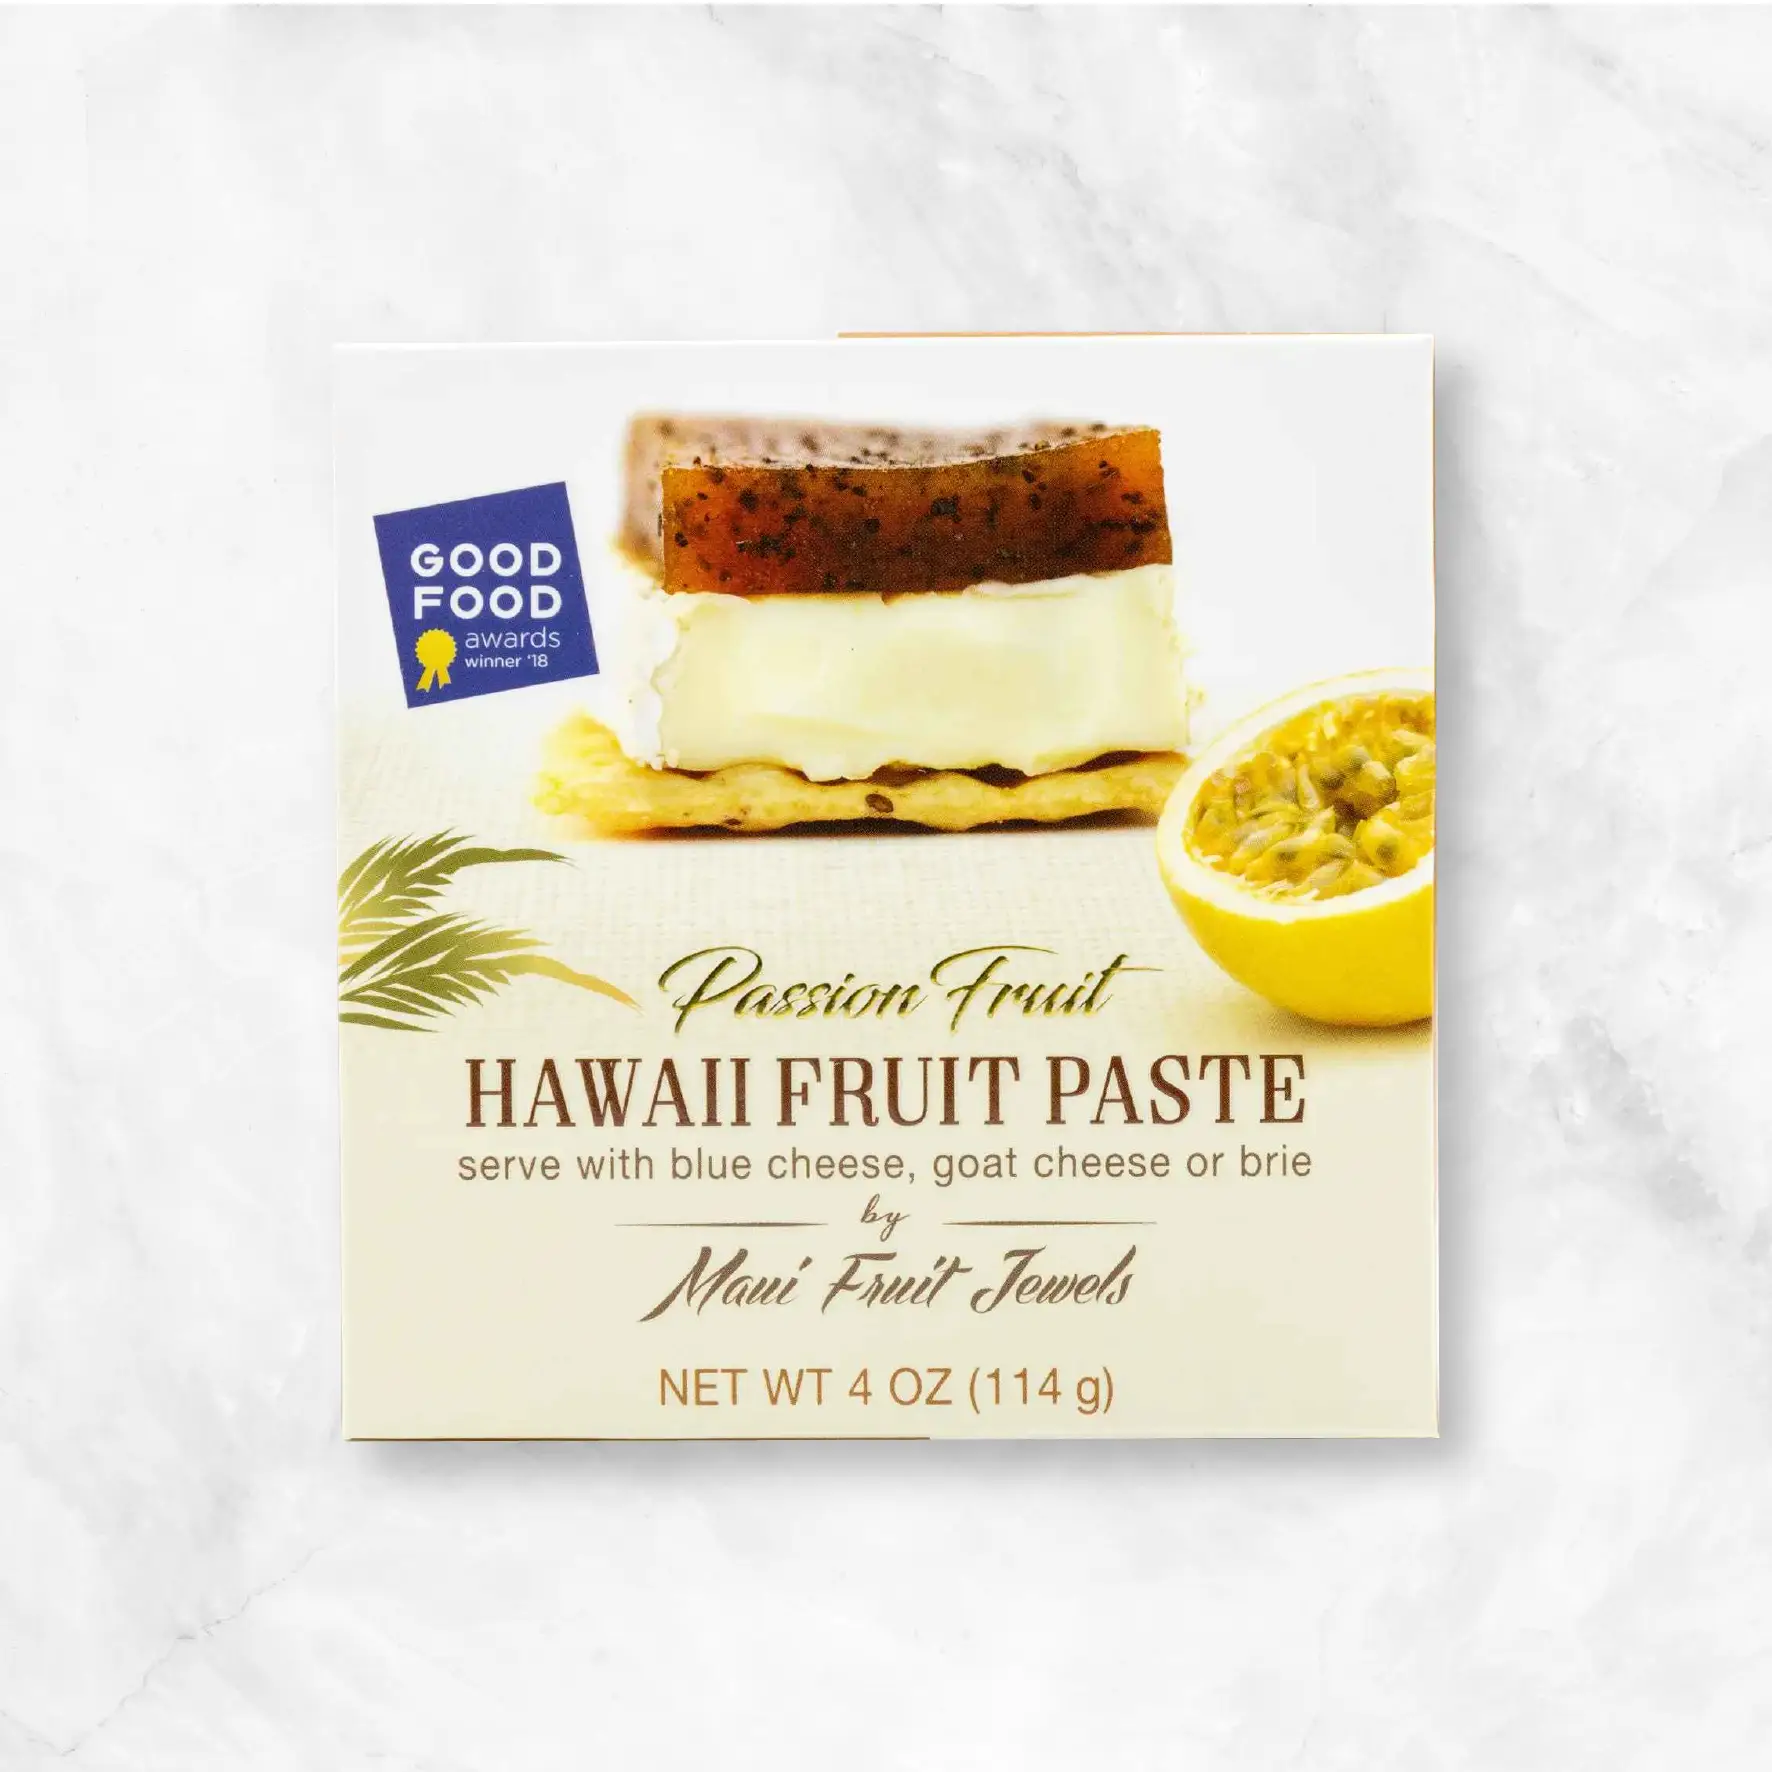 Passion Fruit Hawaii Fruit Paste Delivery